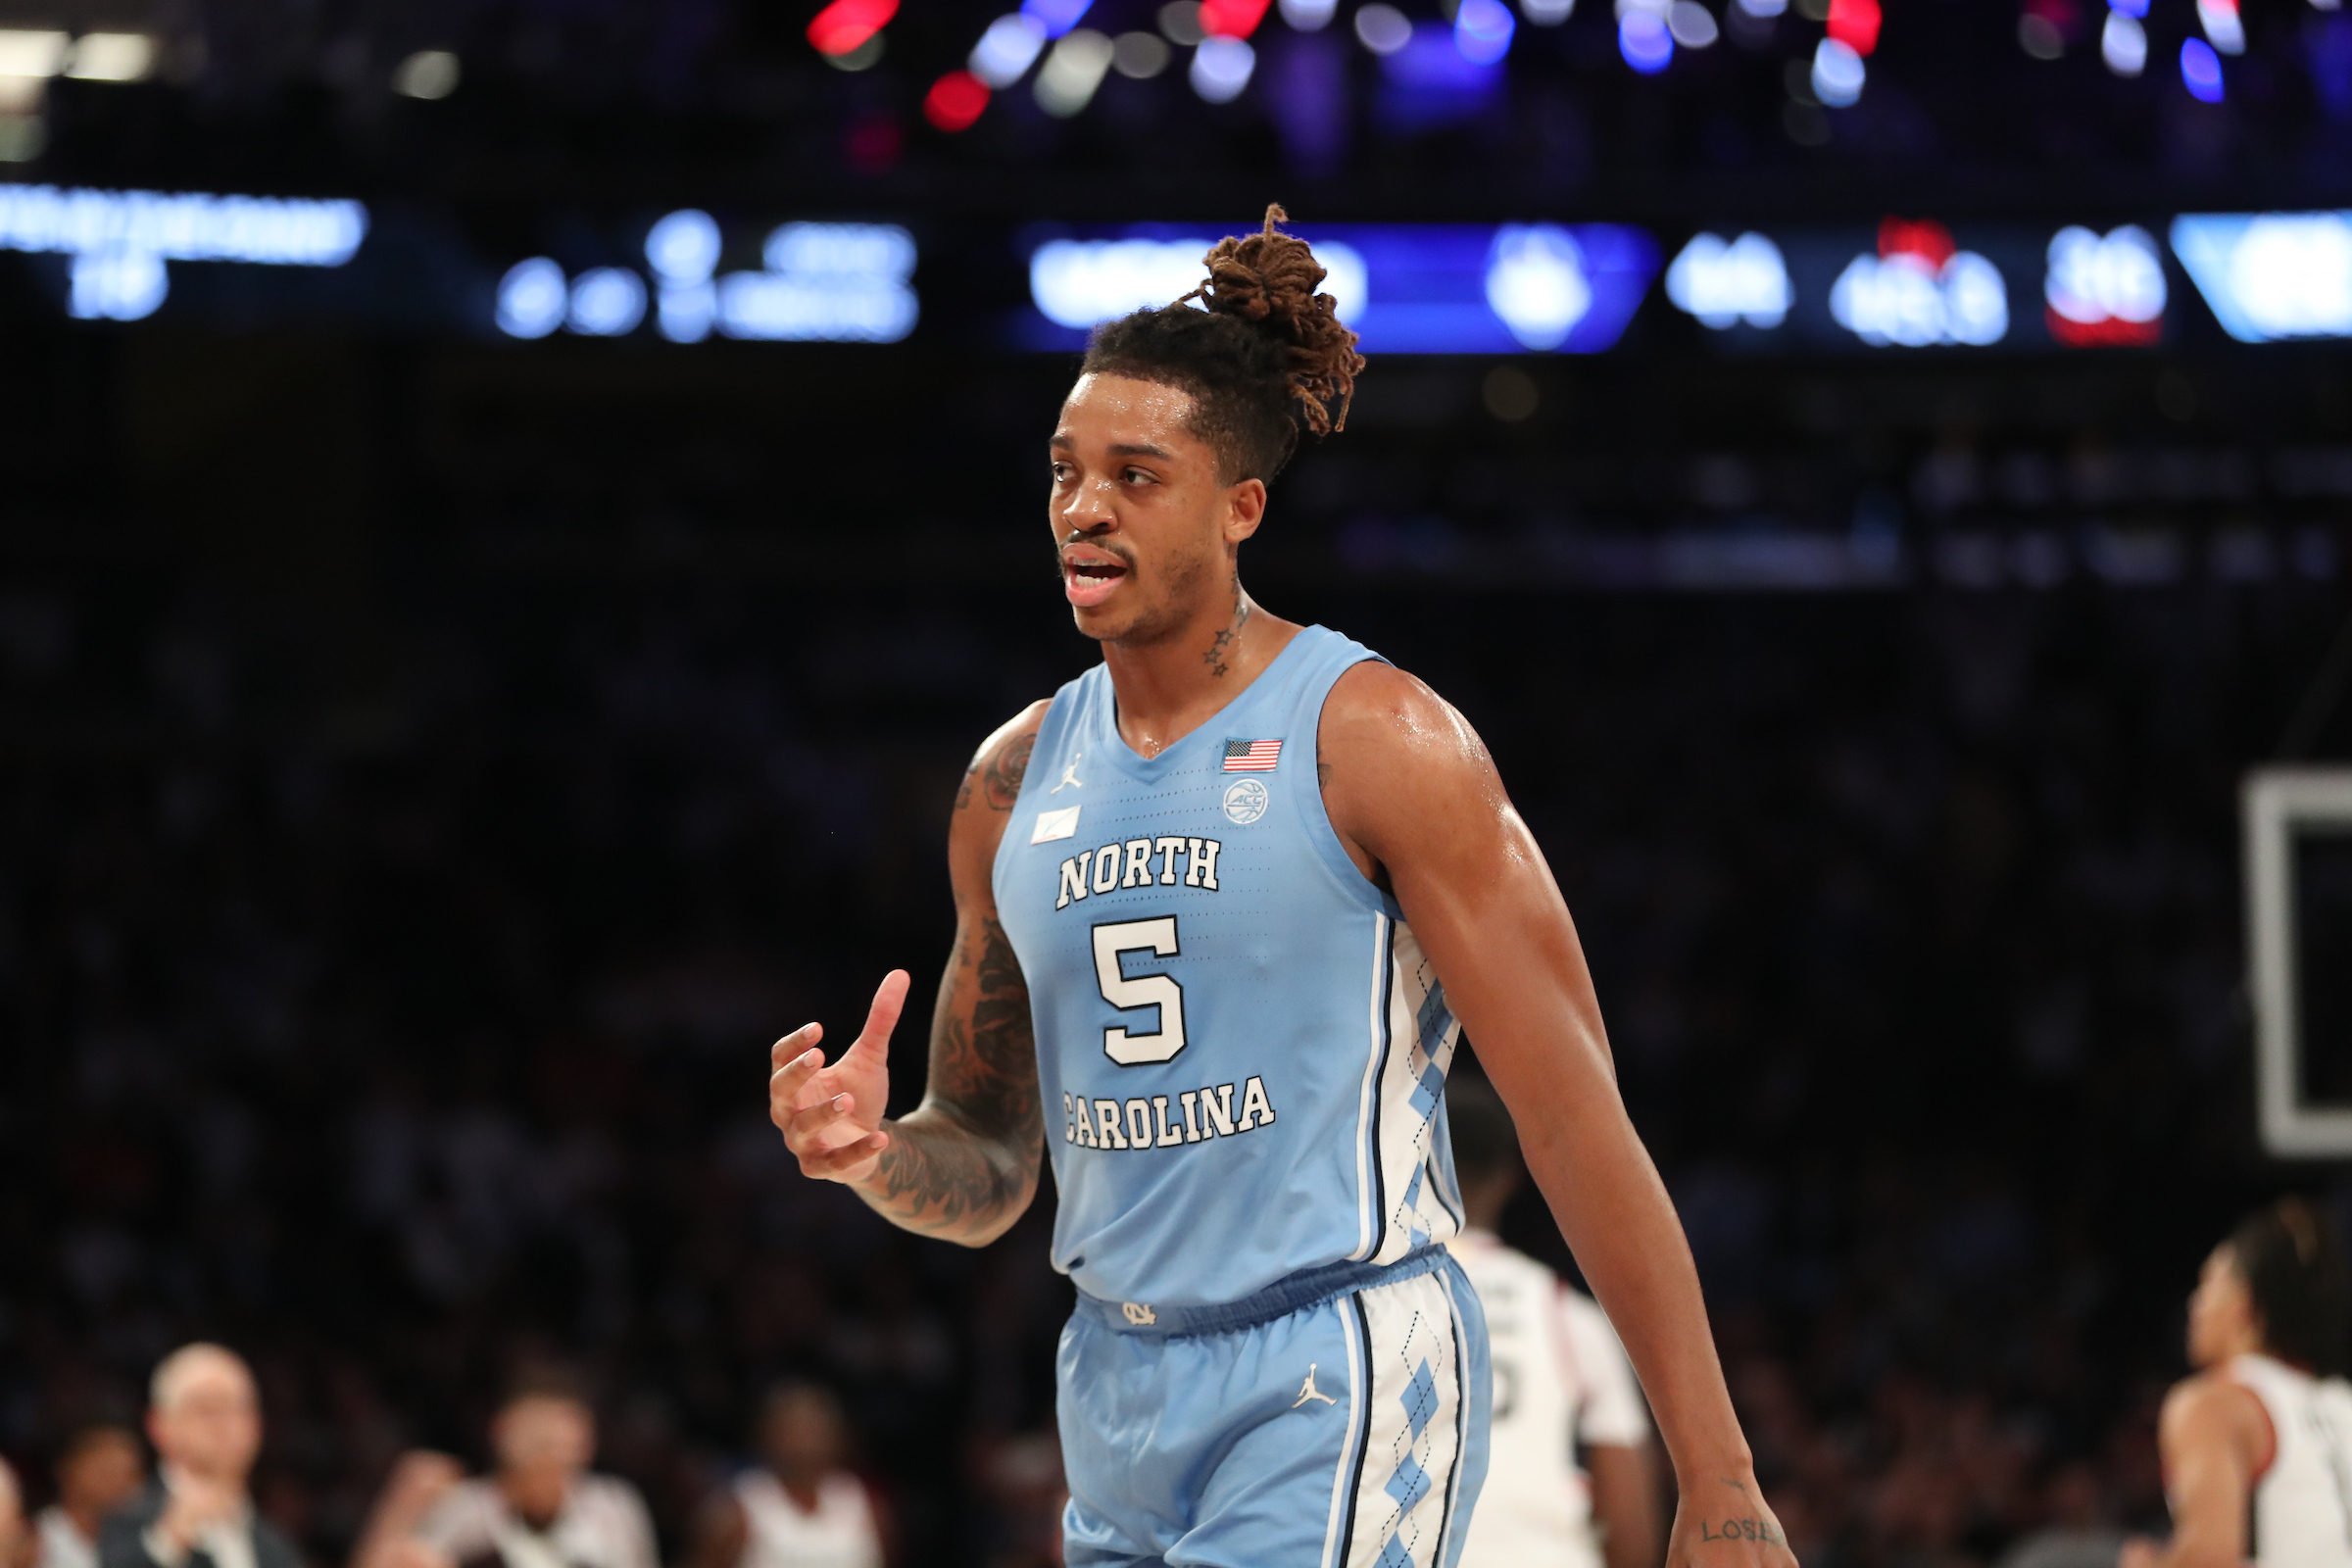 Armando Bacot Featured in "Jeopardy!" Clue